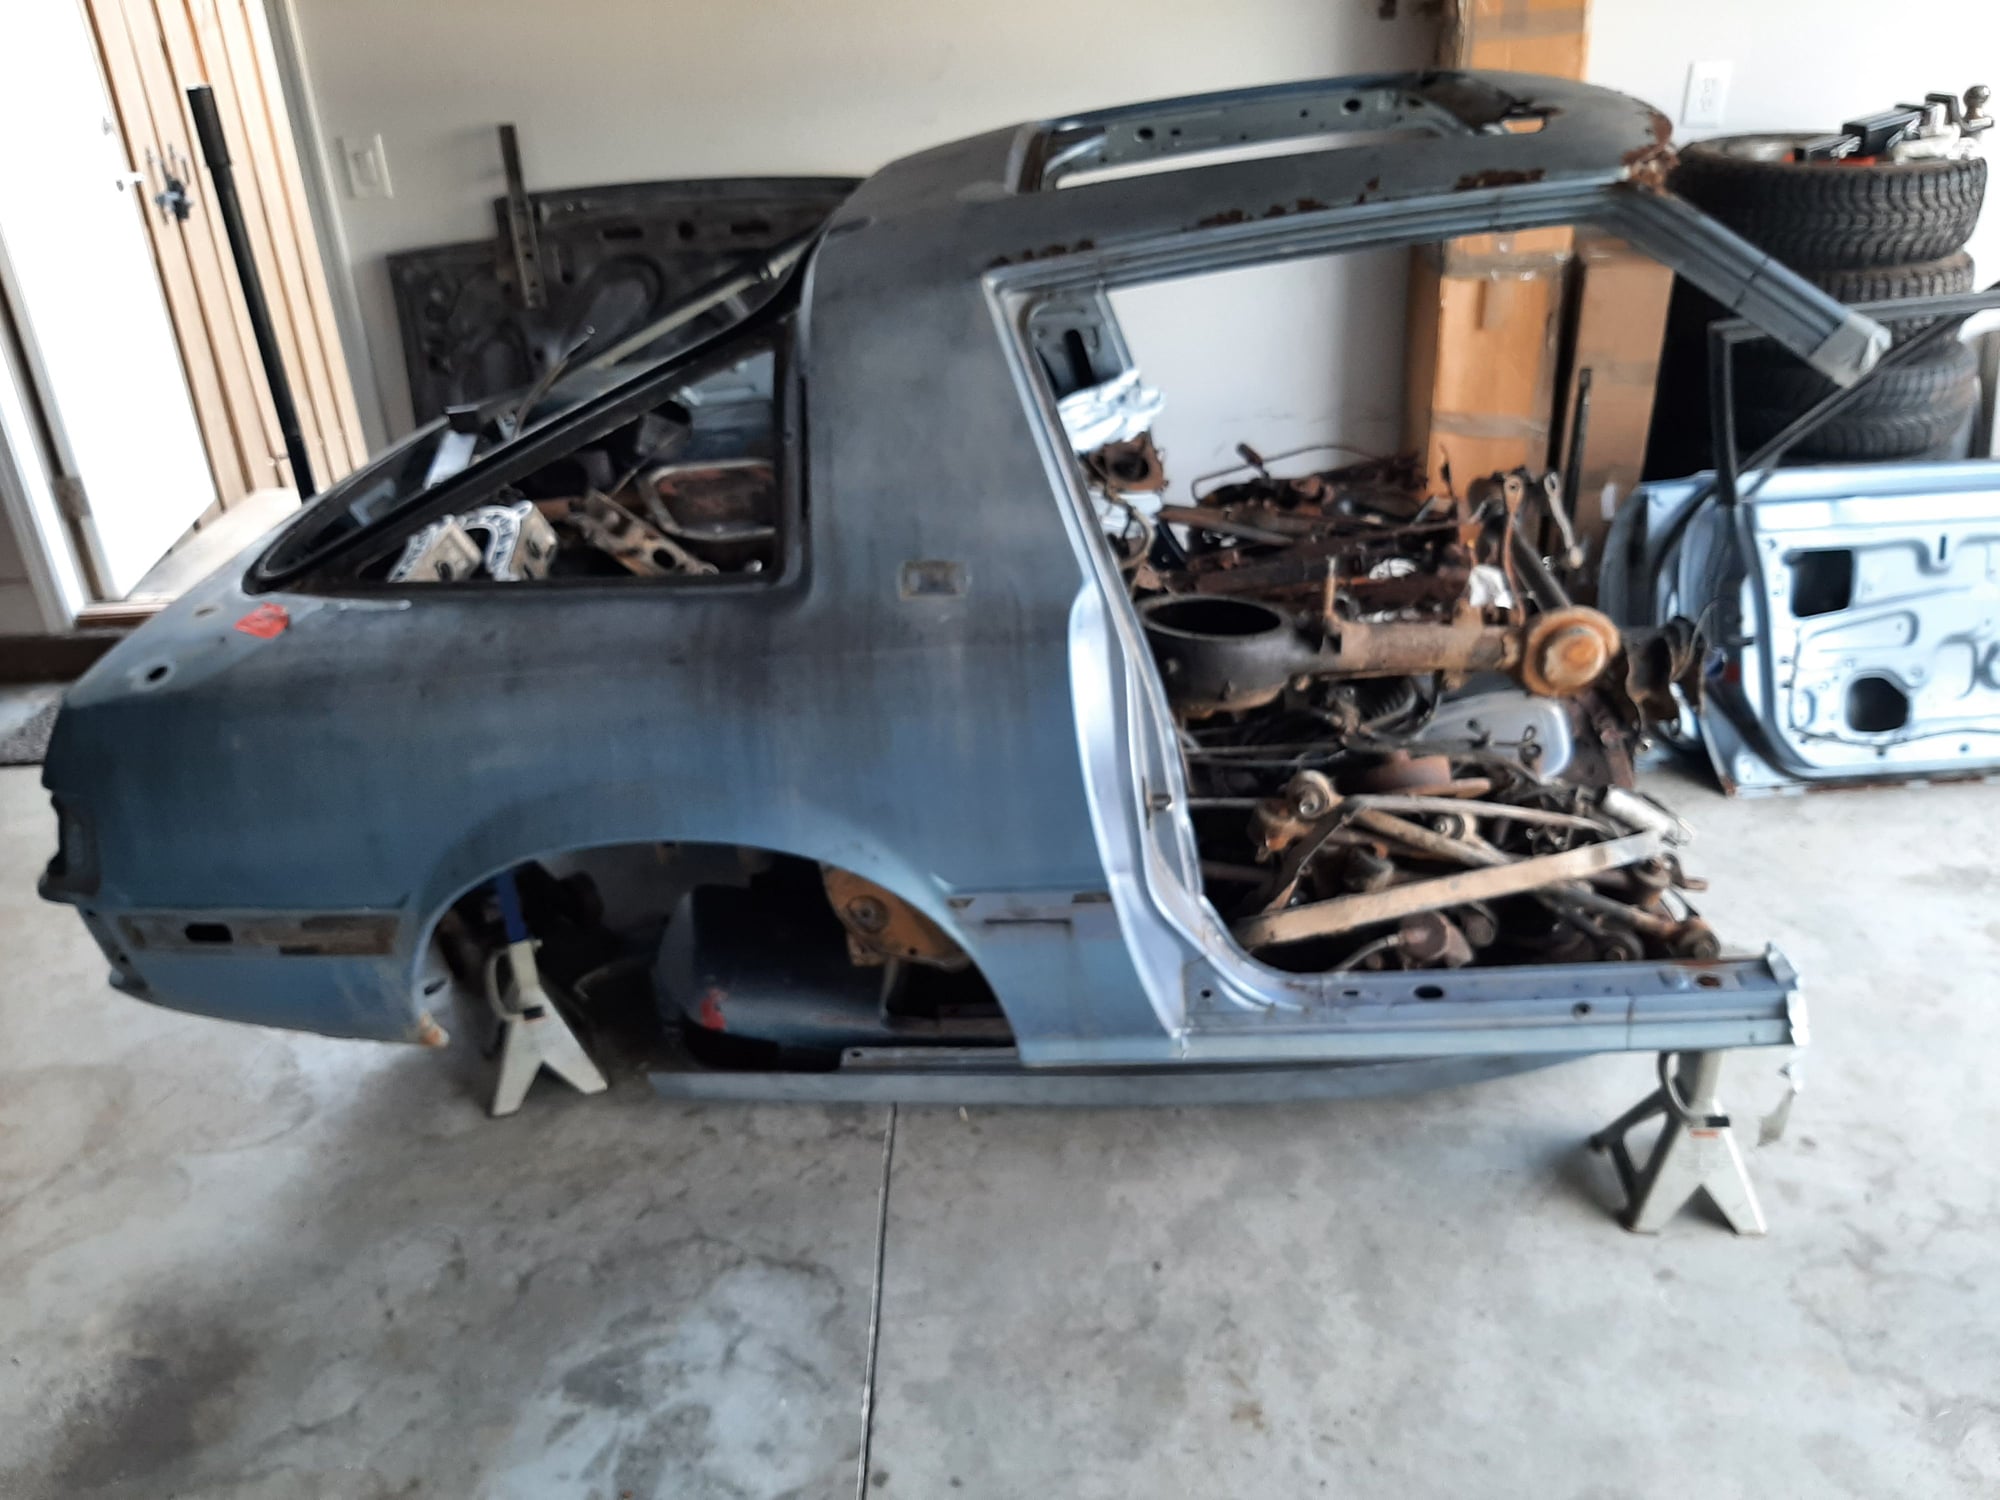 1983 Mazda RX-7 - Parting out a 1983 RX-7 - Pensacola, FL 32526, United States